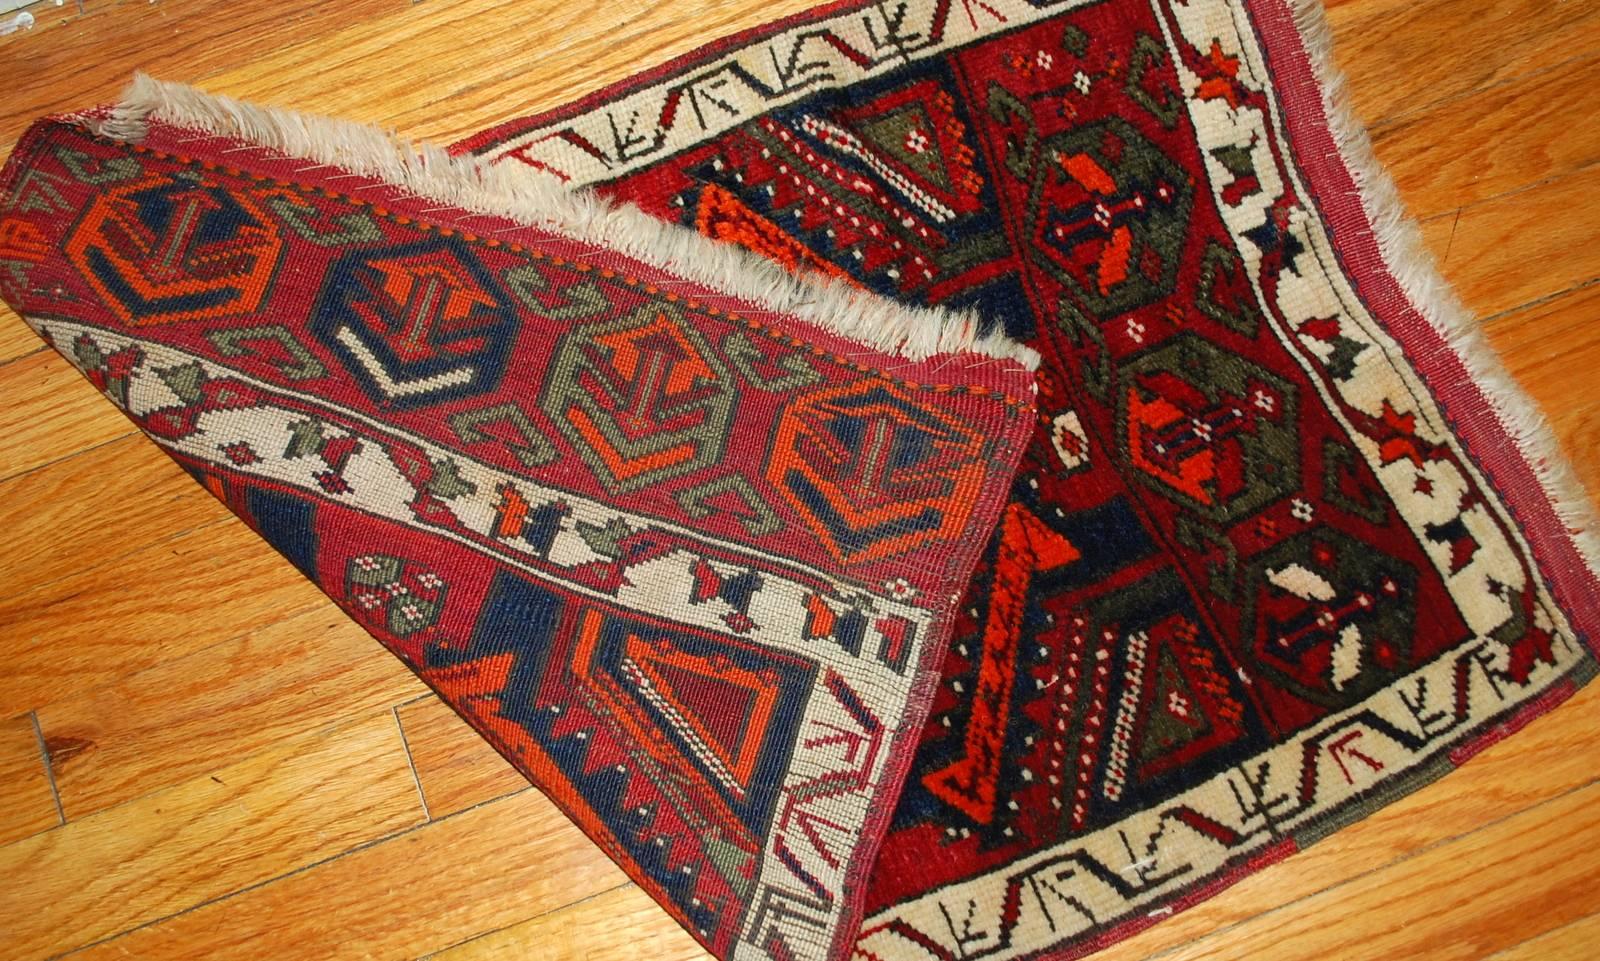 Antique Turkish Yastik rug in original condition. The rug made in combination of bright and dark colours. This Yastik has very busy tribal design. The deep red field decorated with ornaments in bright orange ( natural, not chemical) and bright blue